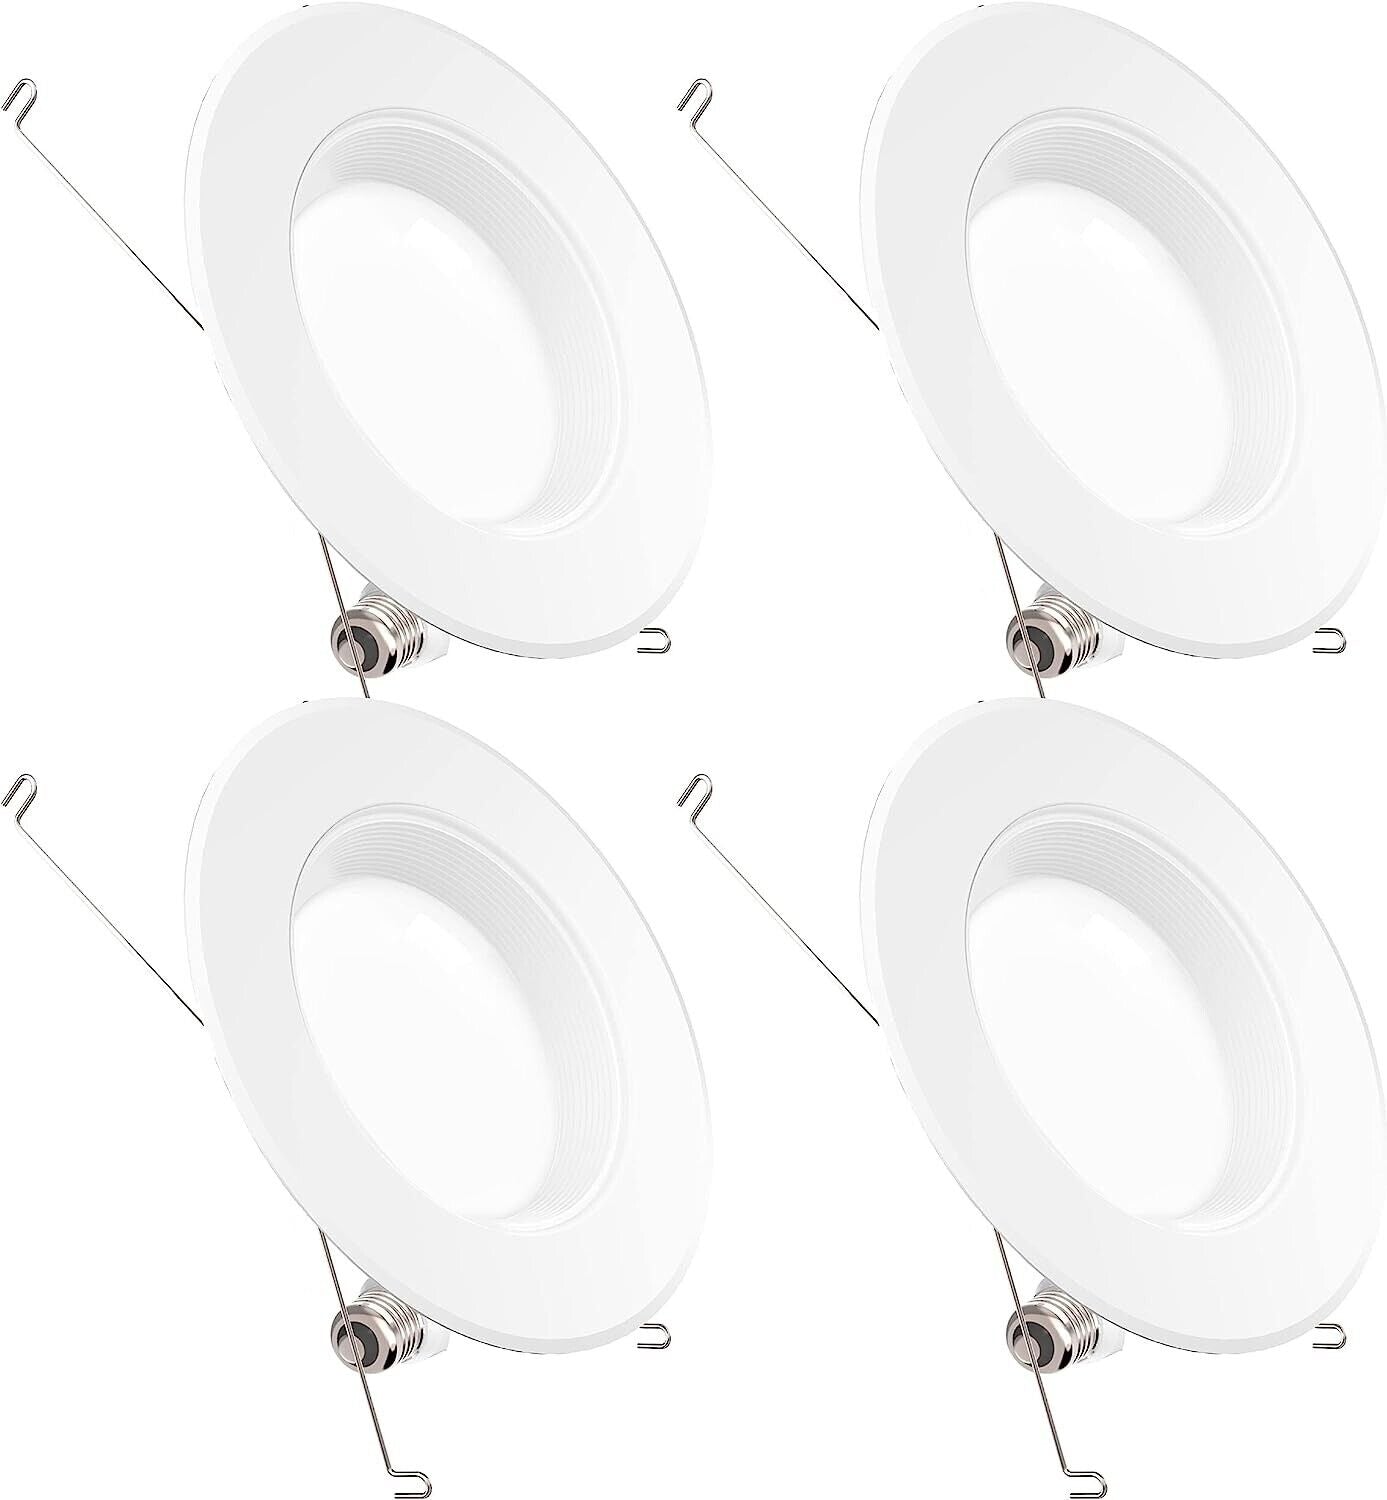 Sunco Lighting 4 Pack 5/6 Inch LED Recessed Downlight, Baffle Trim, Dimmable, - Opticdeals